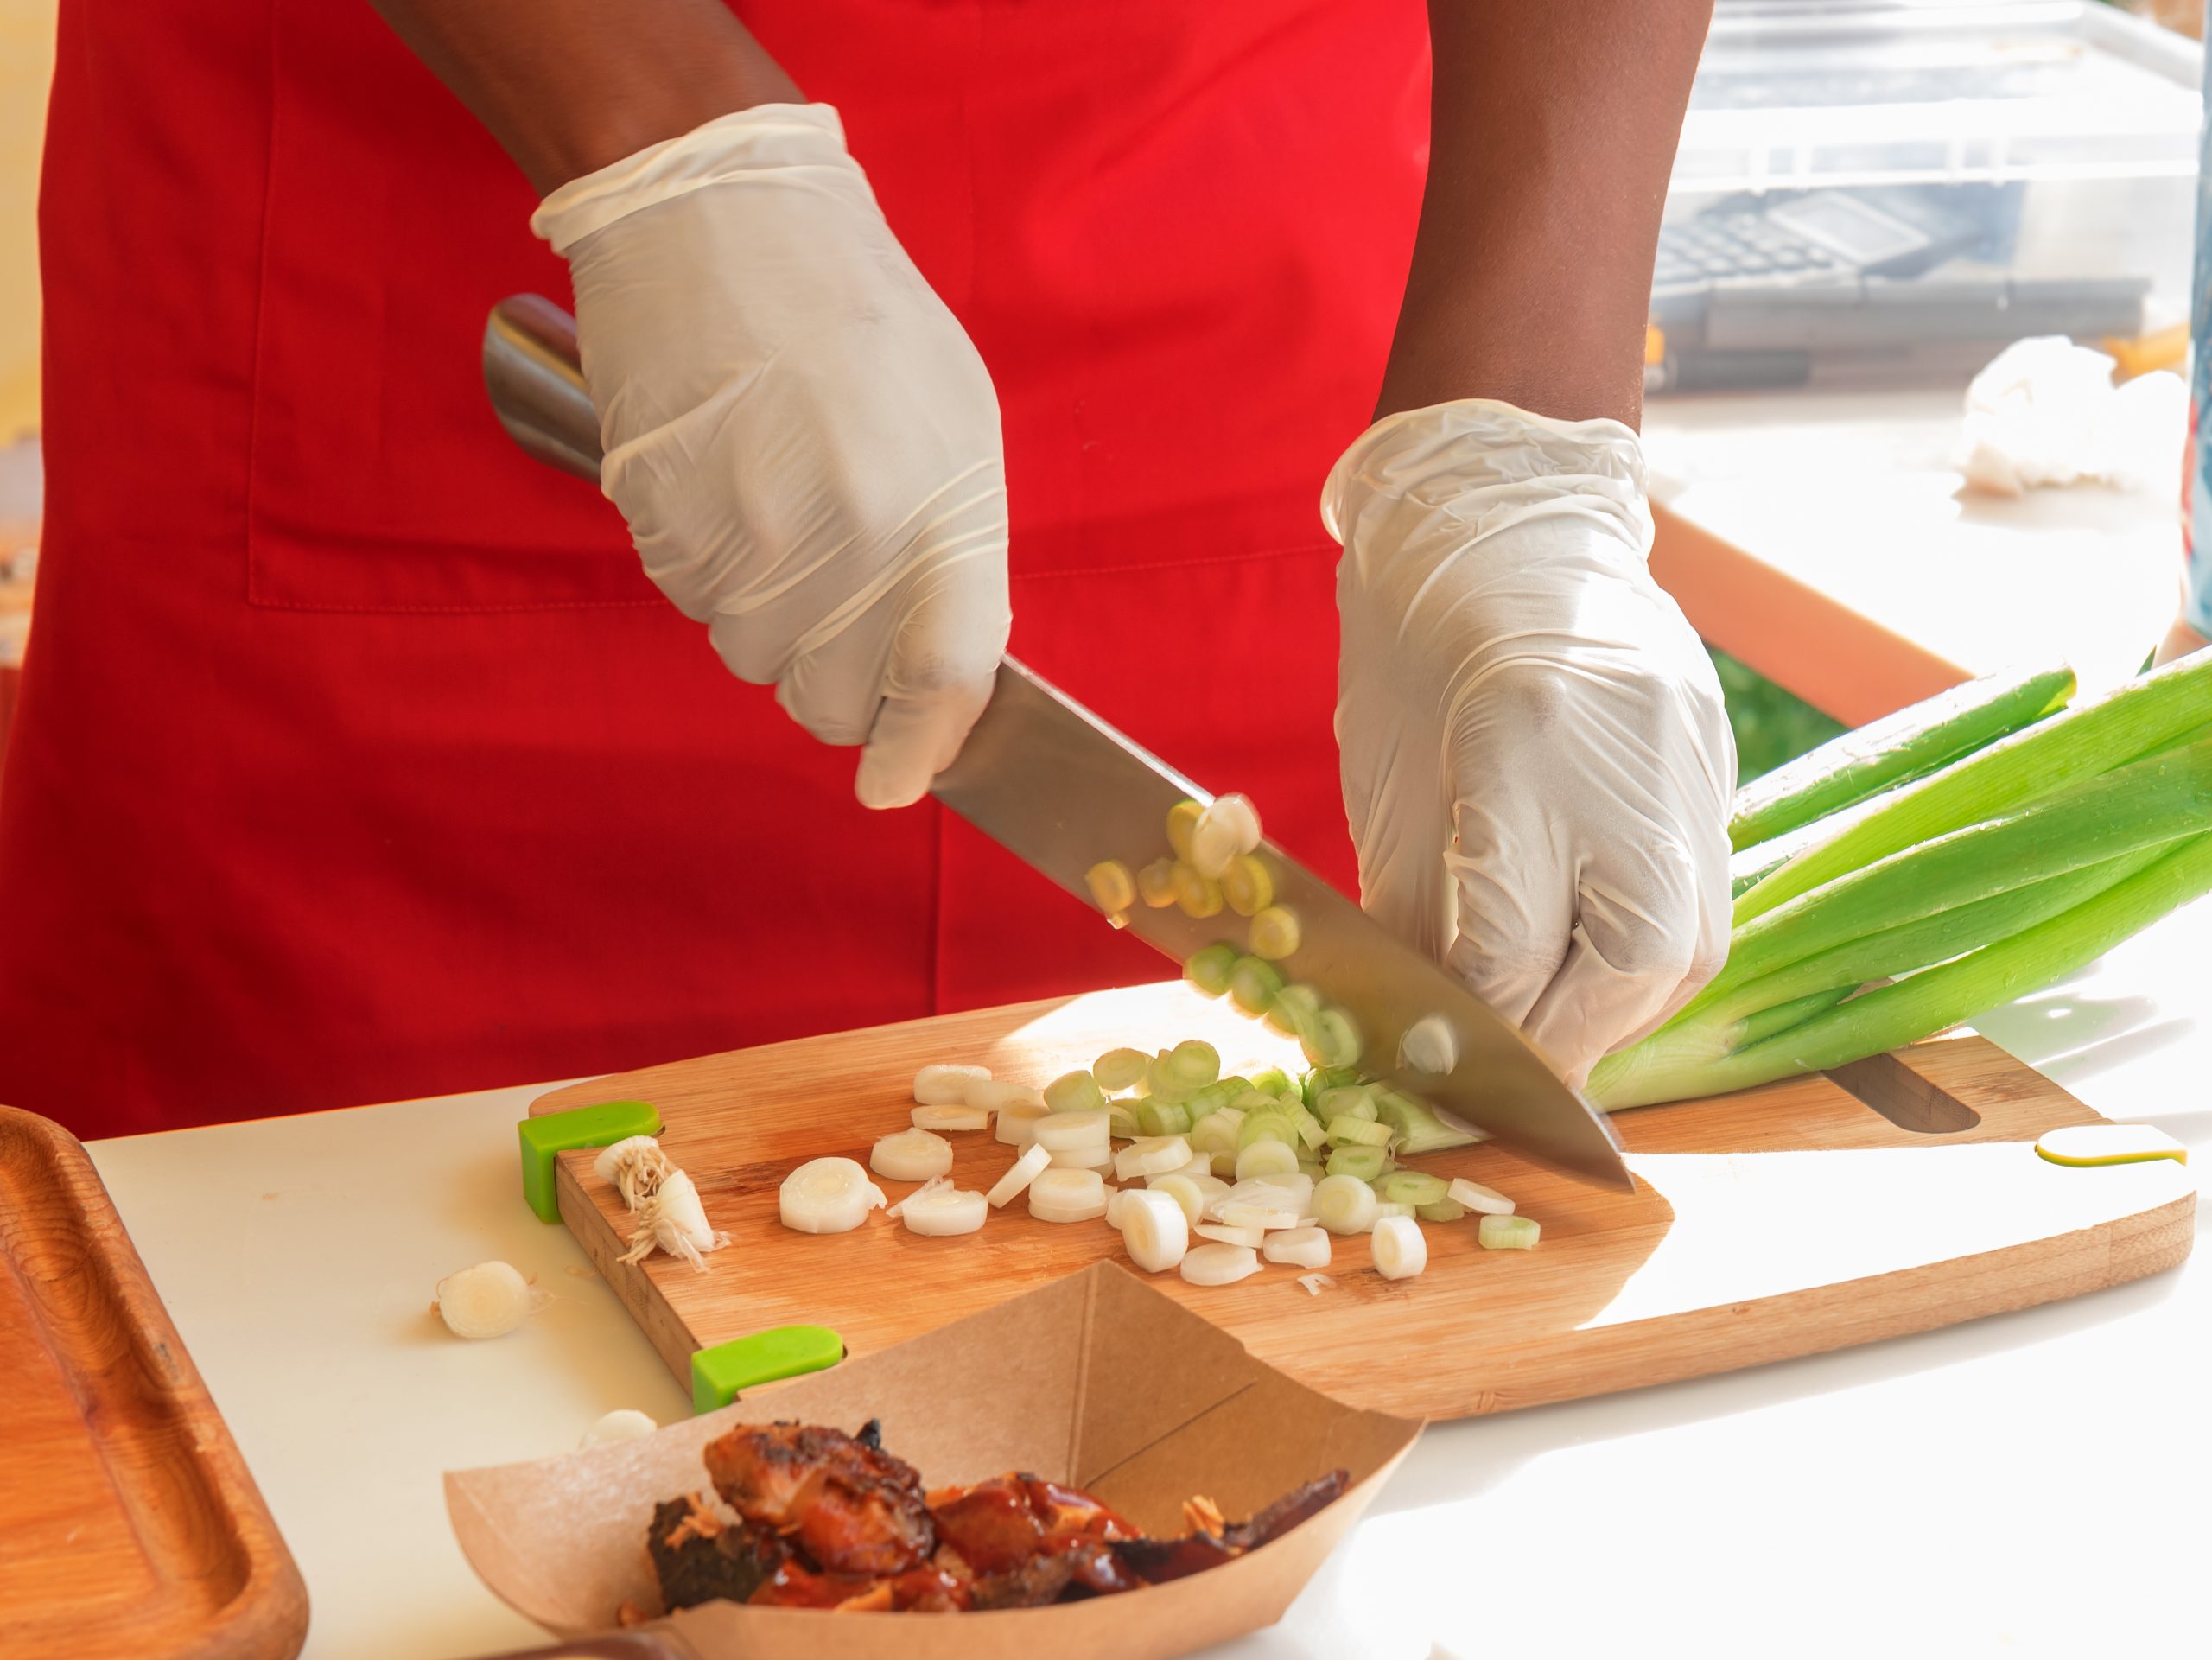 Chef using knife to cut green onions